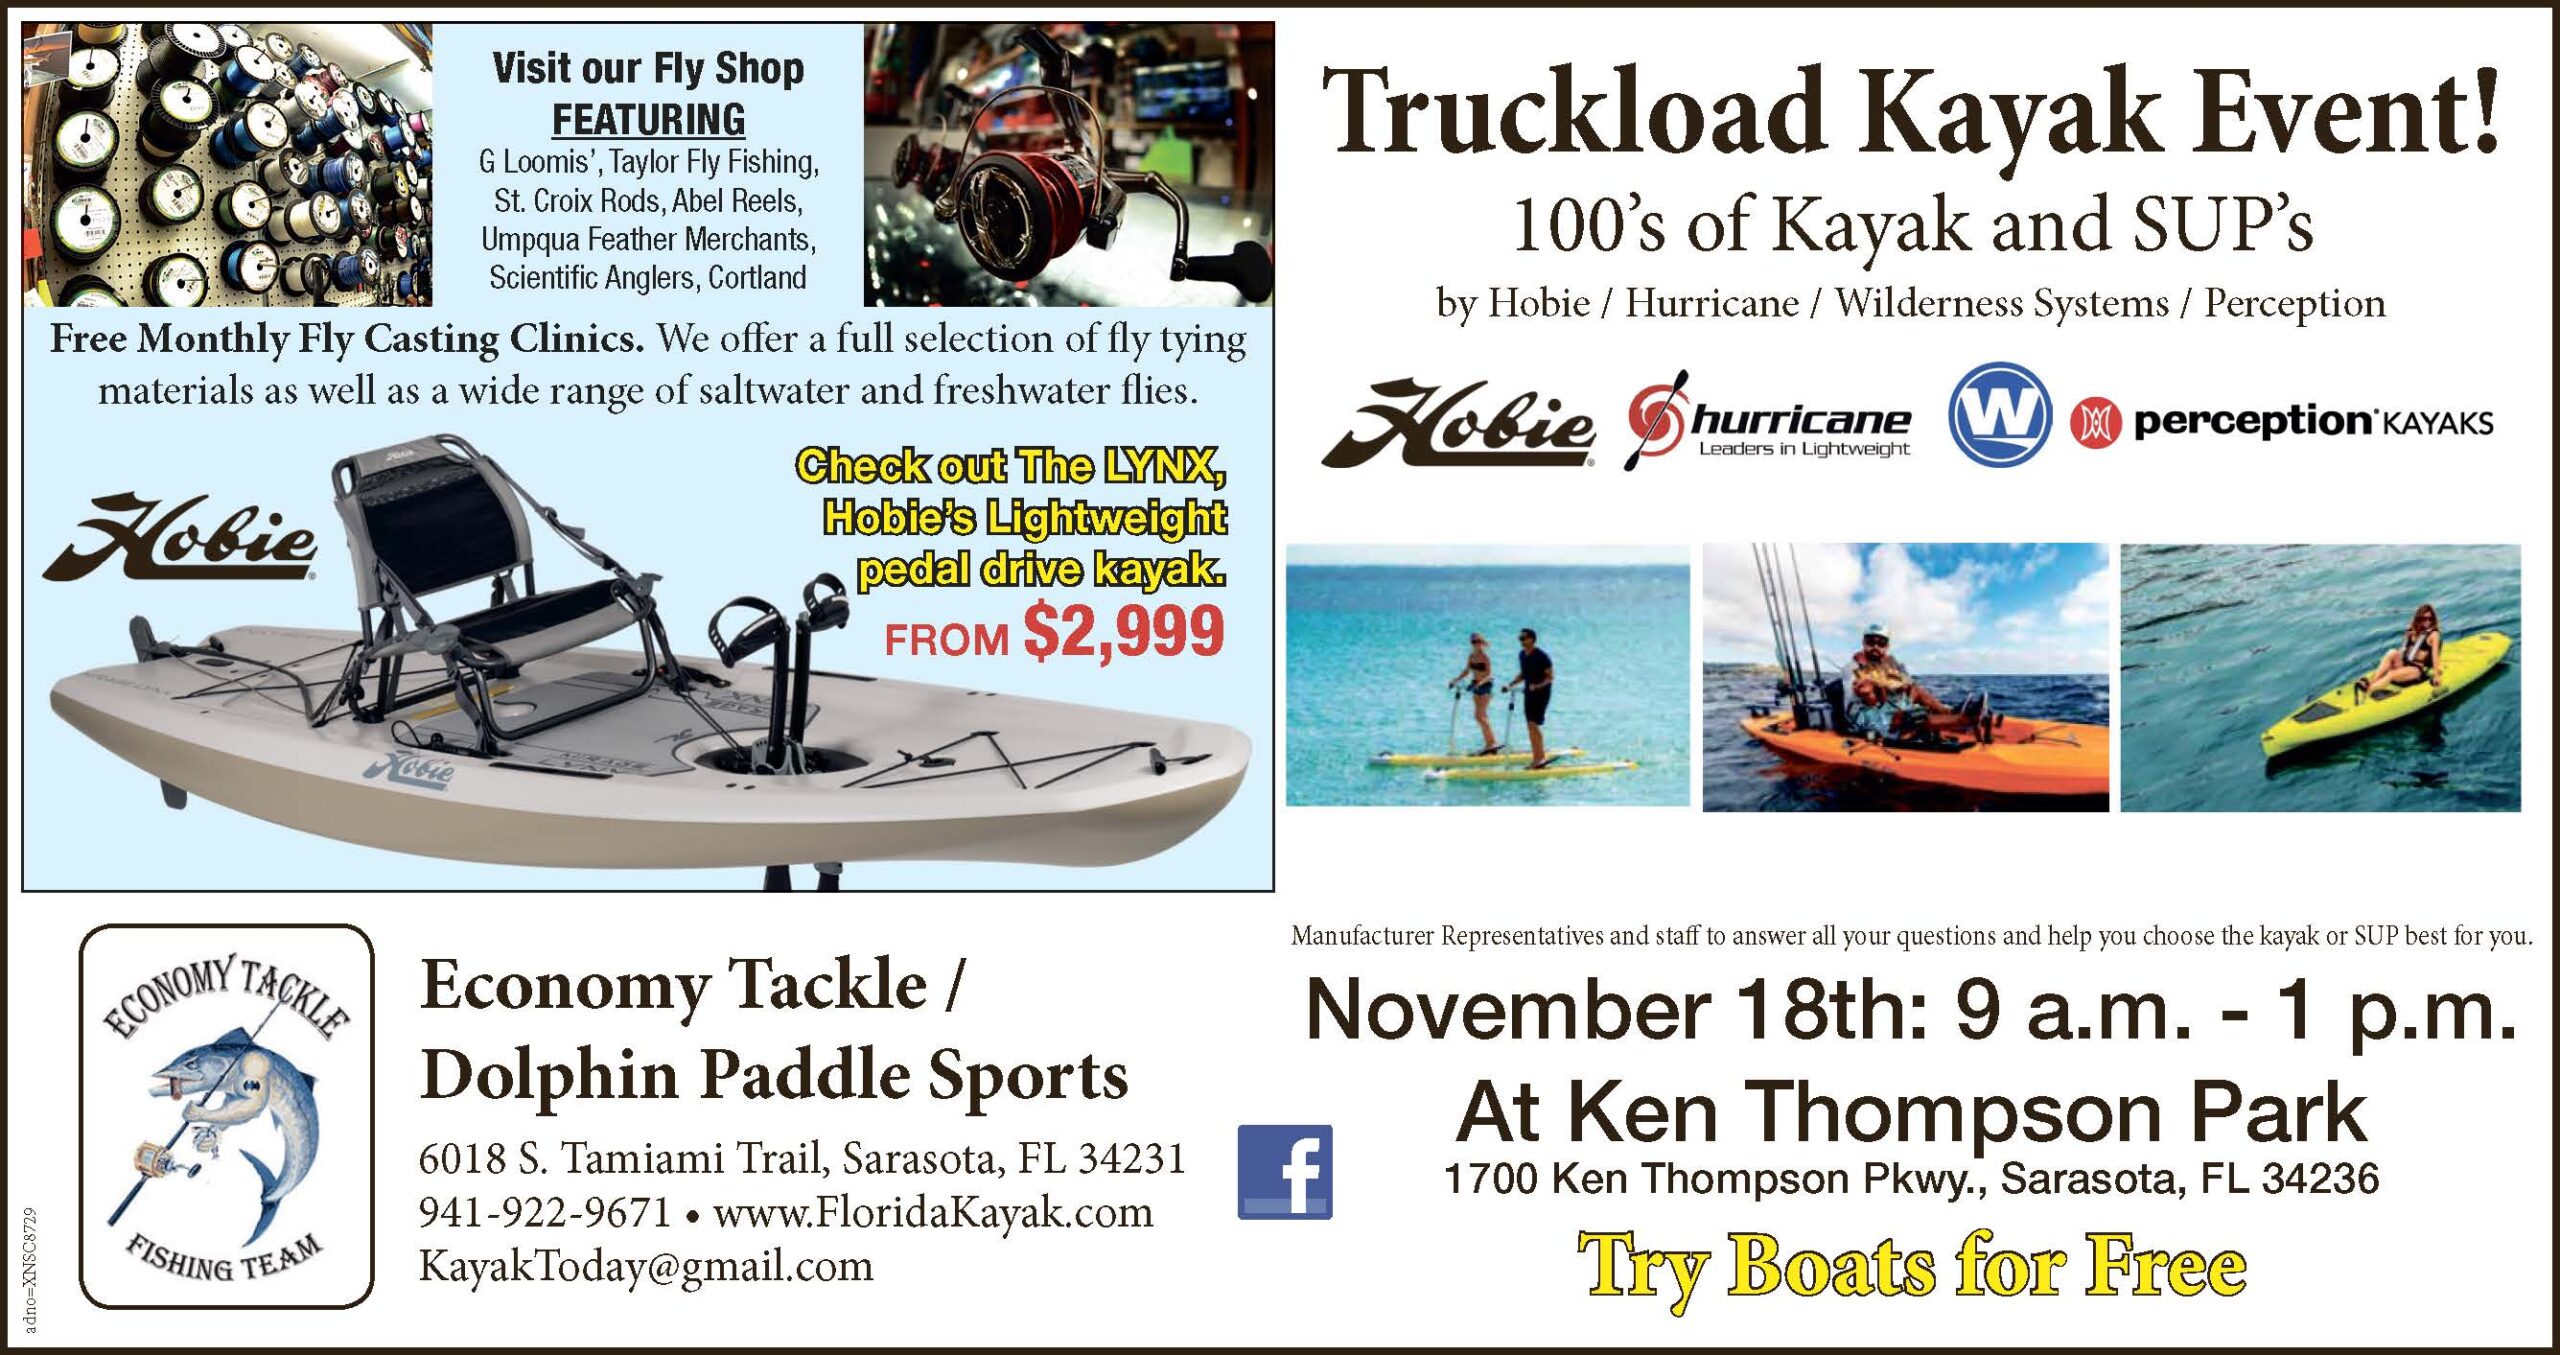 Florida Used Fishing Kayaks and Gear For Sale